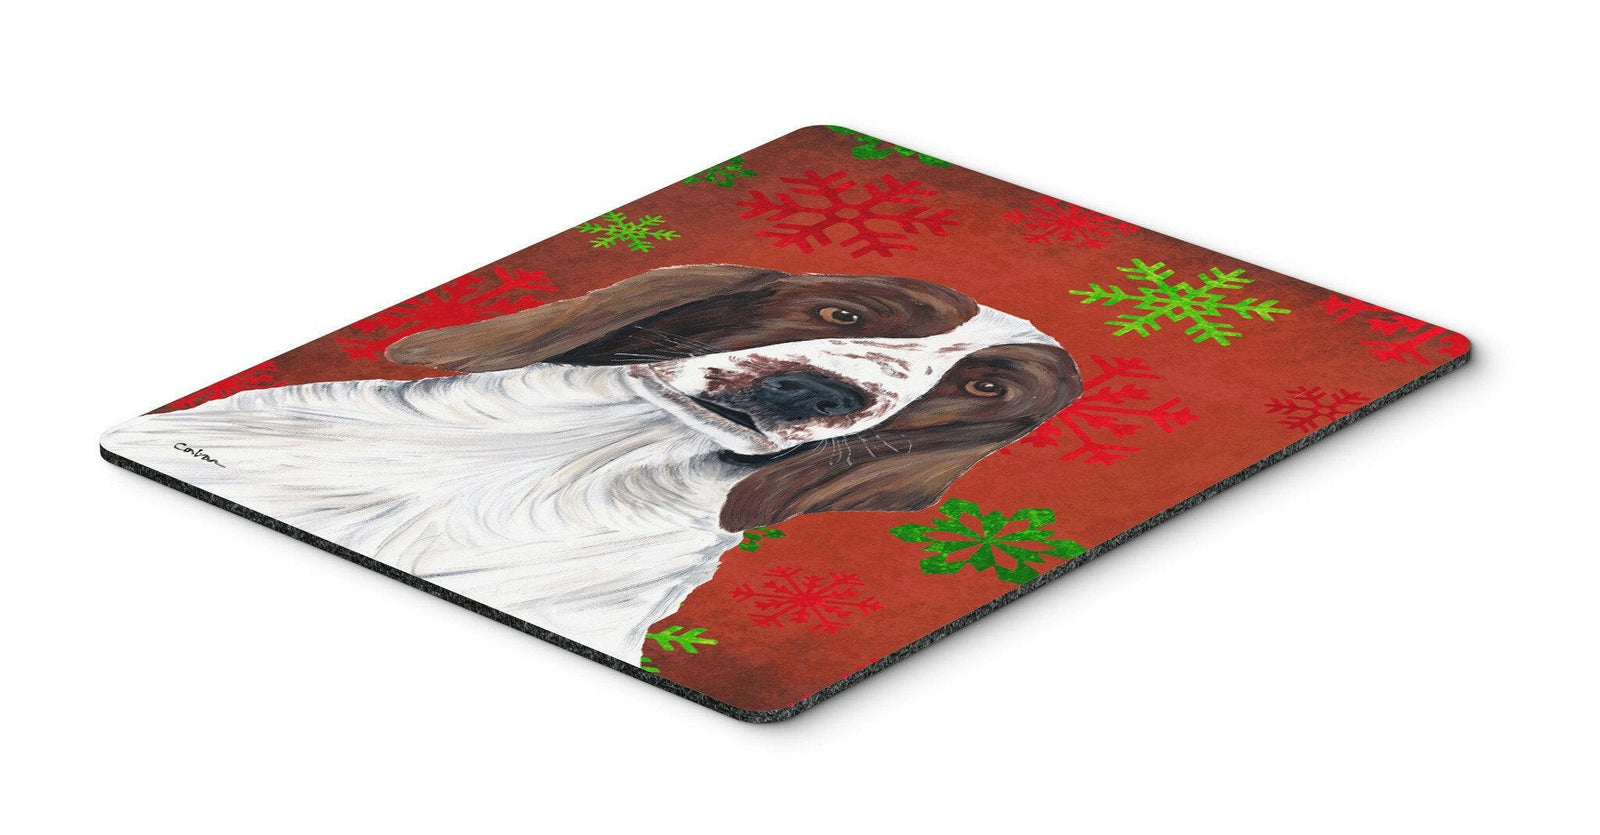 Welsh Springer Spaniel Snowflakes Christmas Mouse Pad, Hot Pad or Trivet by Caroline's Treasures